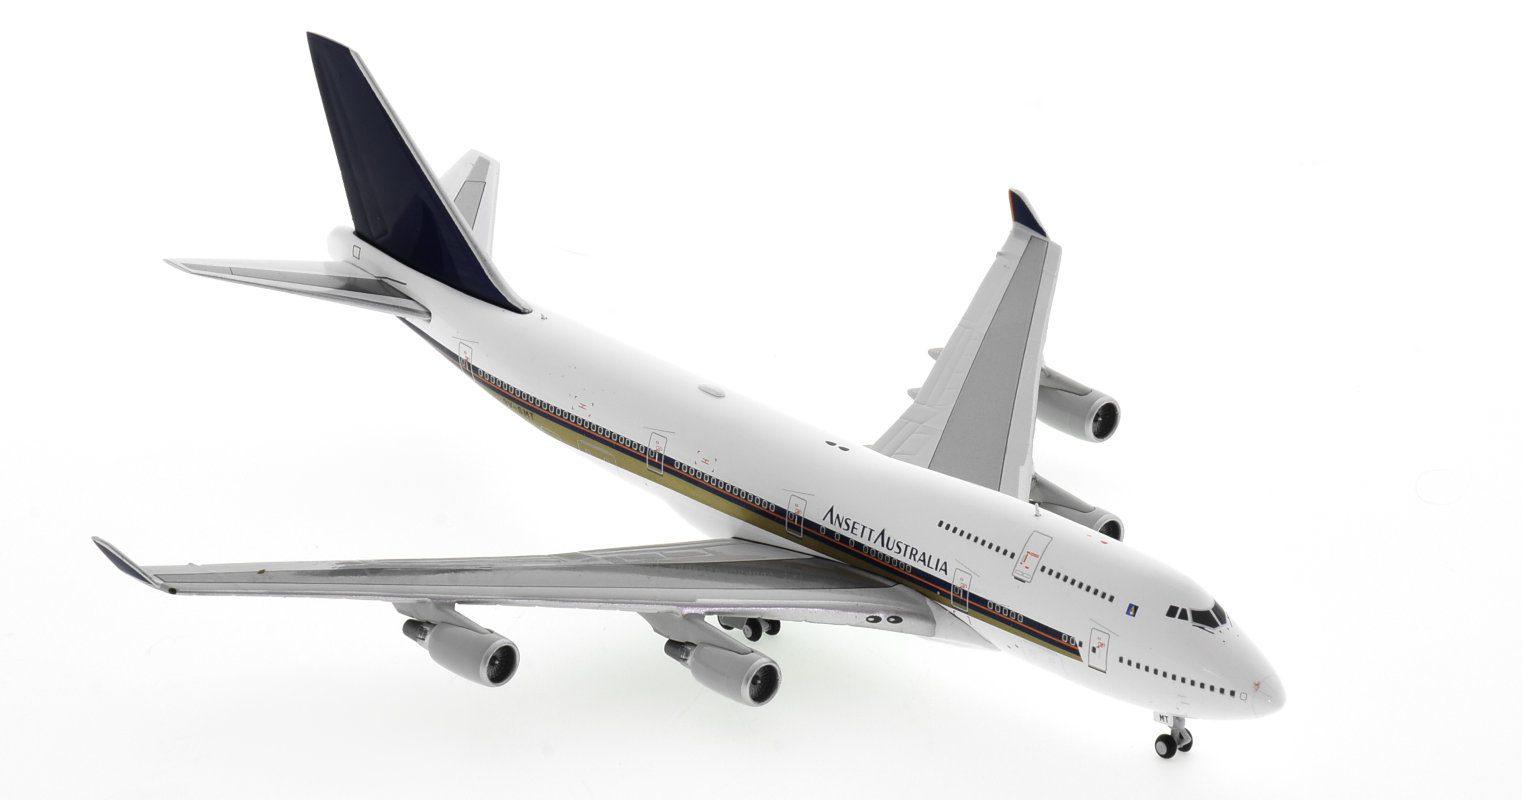 Front starboard side view of JC Wings EW4744005 - Boeing 747-400 1/400 scale diecast model, registration 9V-SMT, in Singapore Airlines's livery with Ansett Australia tittles.